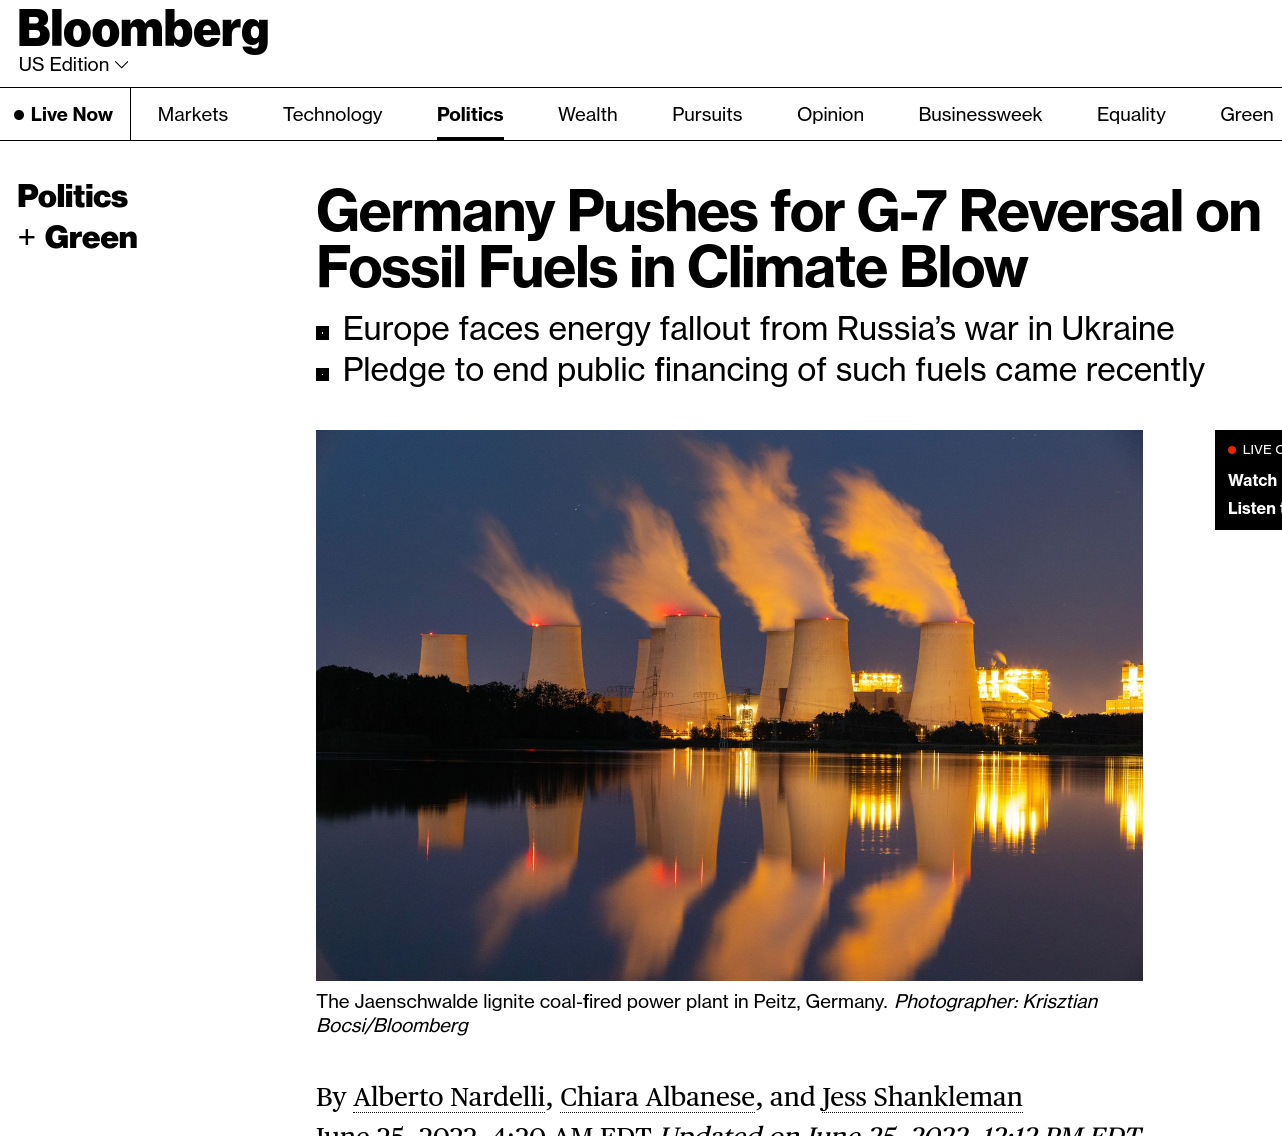 Cheers! ‘Climate backtracking’: Germany Pushes for G-7 Reversal on Fossil Fuels in Climate Blow – ‘U-turn in global efforts to fight climate change’